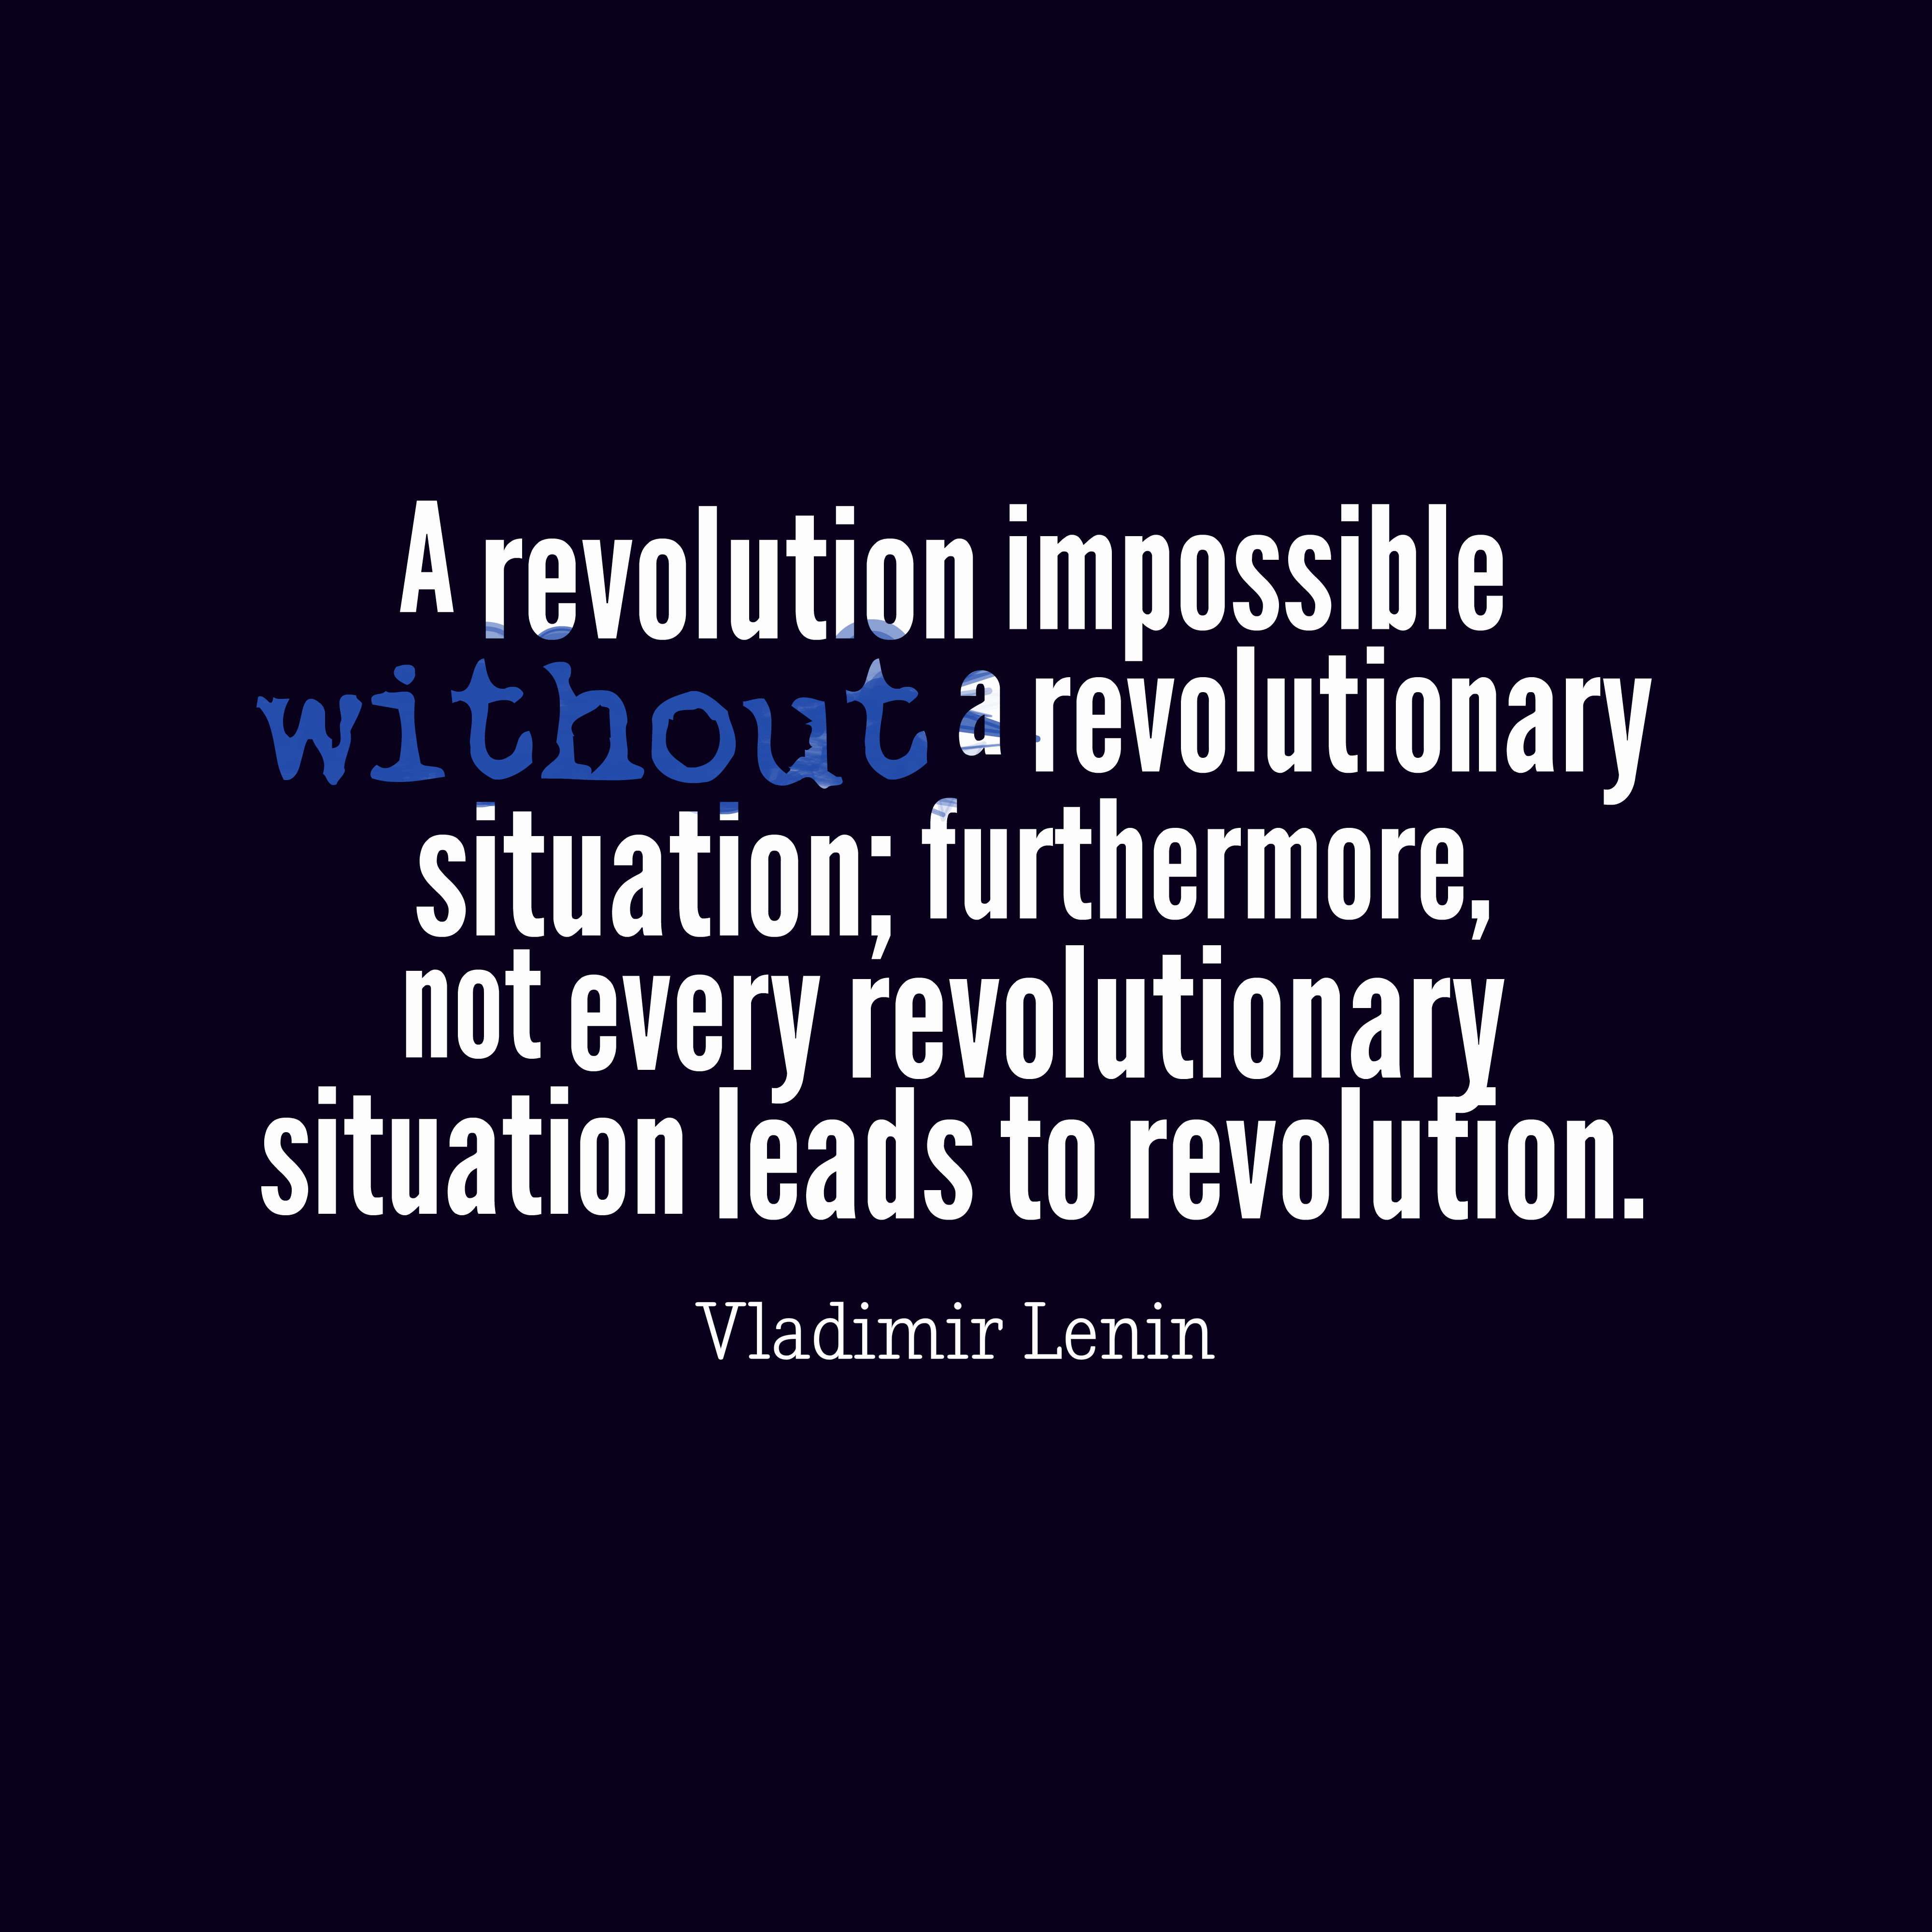 Quotes Image Of A Revolution Impossible Without A Revolutionary - The Pentagon, 9/11 Memorial - HD Wallpaper 